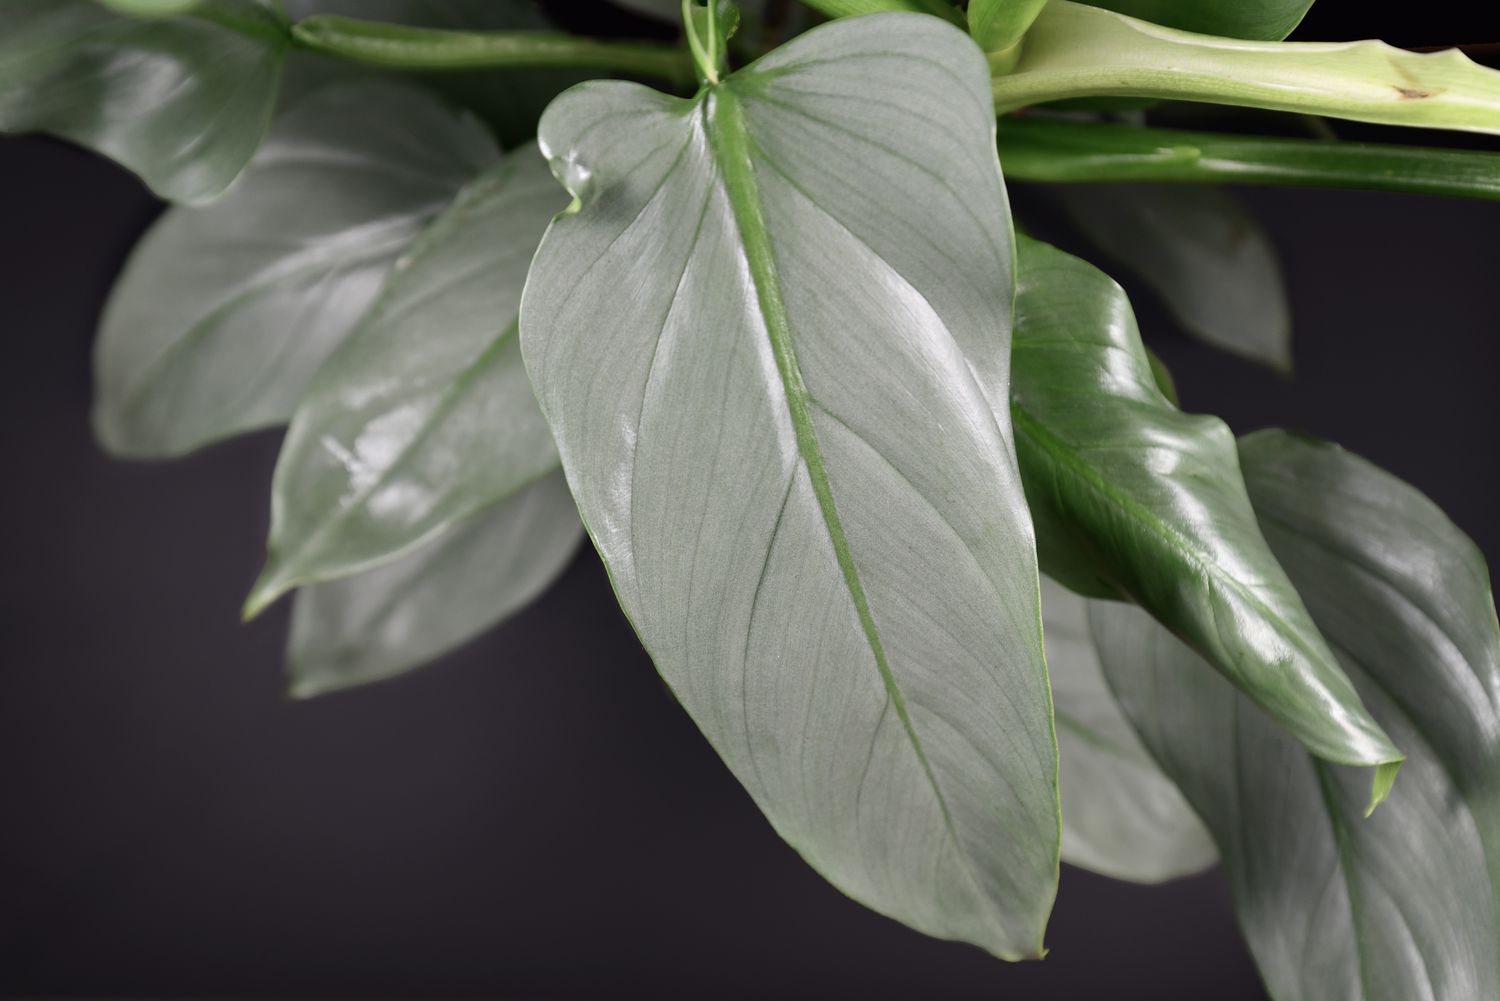 Close up of philodendron silver sword leaves against a black background.